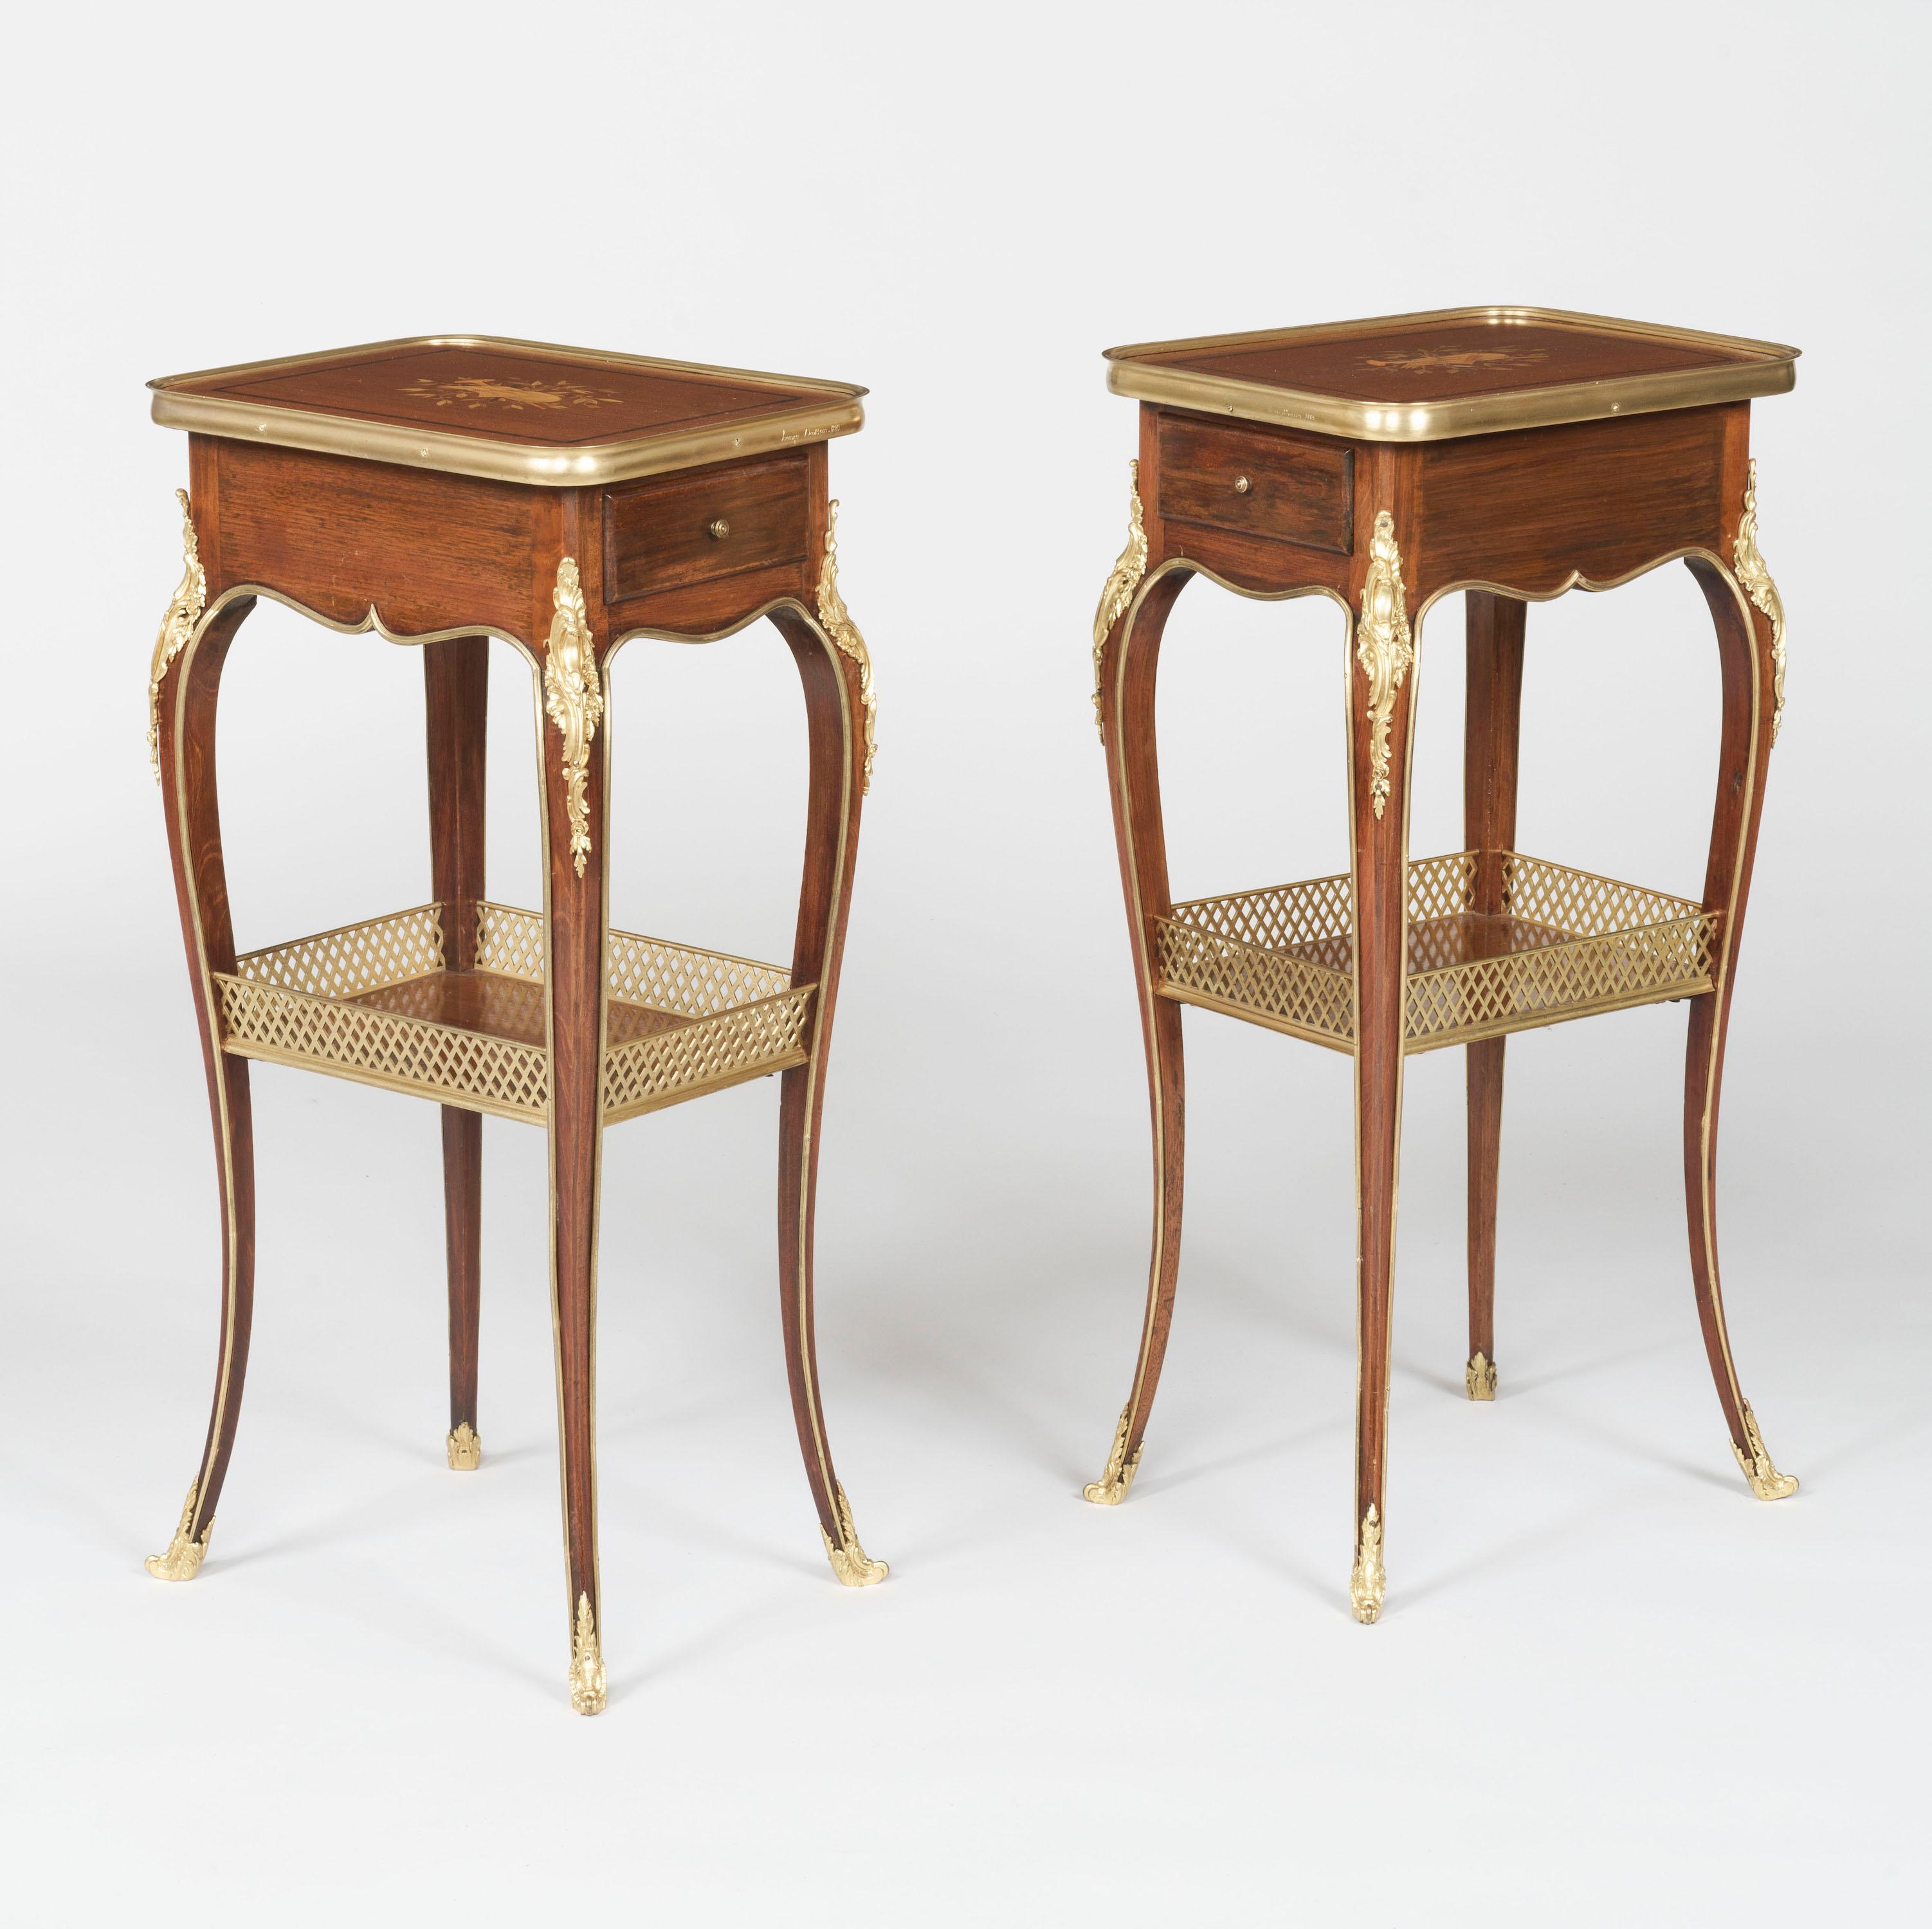 A Matched Pair of Tables Ambulantes
in the Transitional Style
By Henry Dasson

Constructed from mahogany and ormolu-mounted throughout, the tables supported on cabriole legs with bronze sabots and acanthus-styled espagnolettes, a galleried undertier